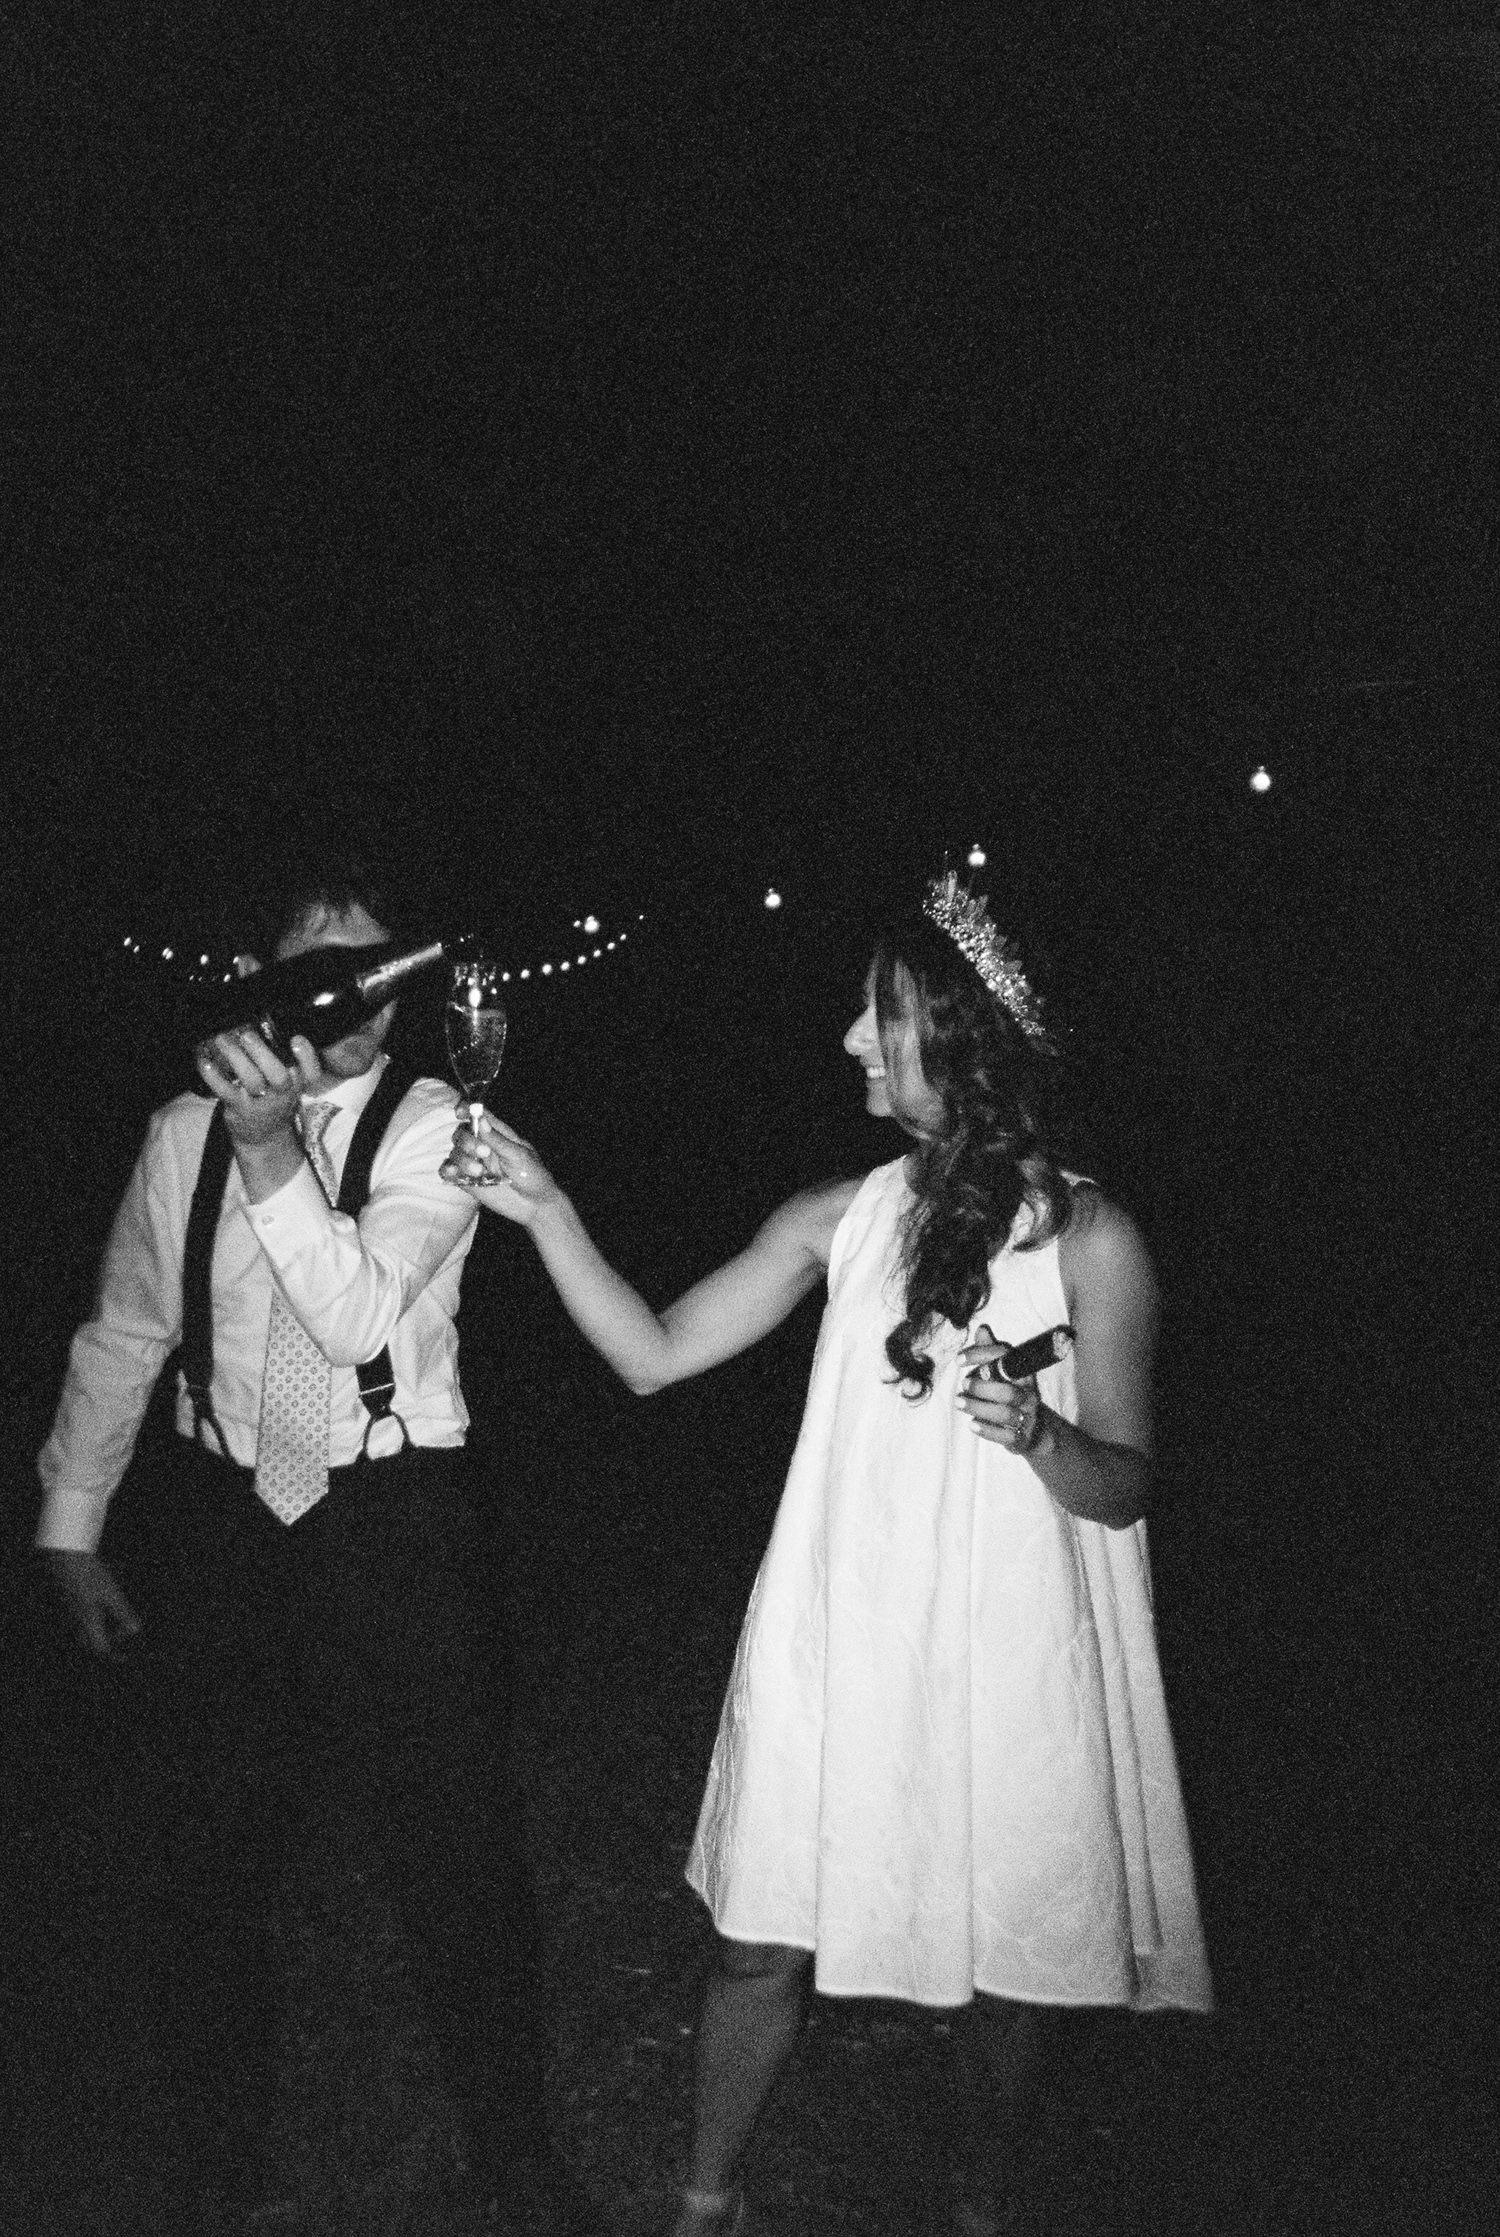 Adirondack Mountain Wedding | Champagne + Cigars at the end of the night pictures shot on a disposable camera | Photographed by Mary Dougherty